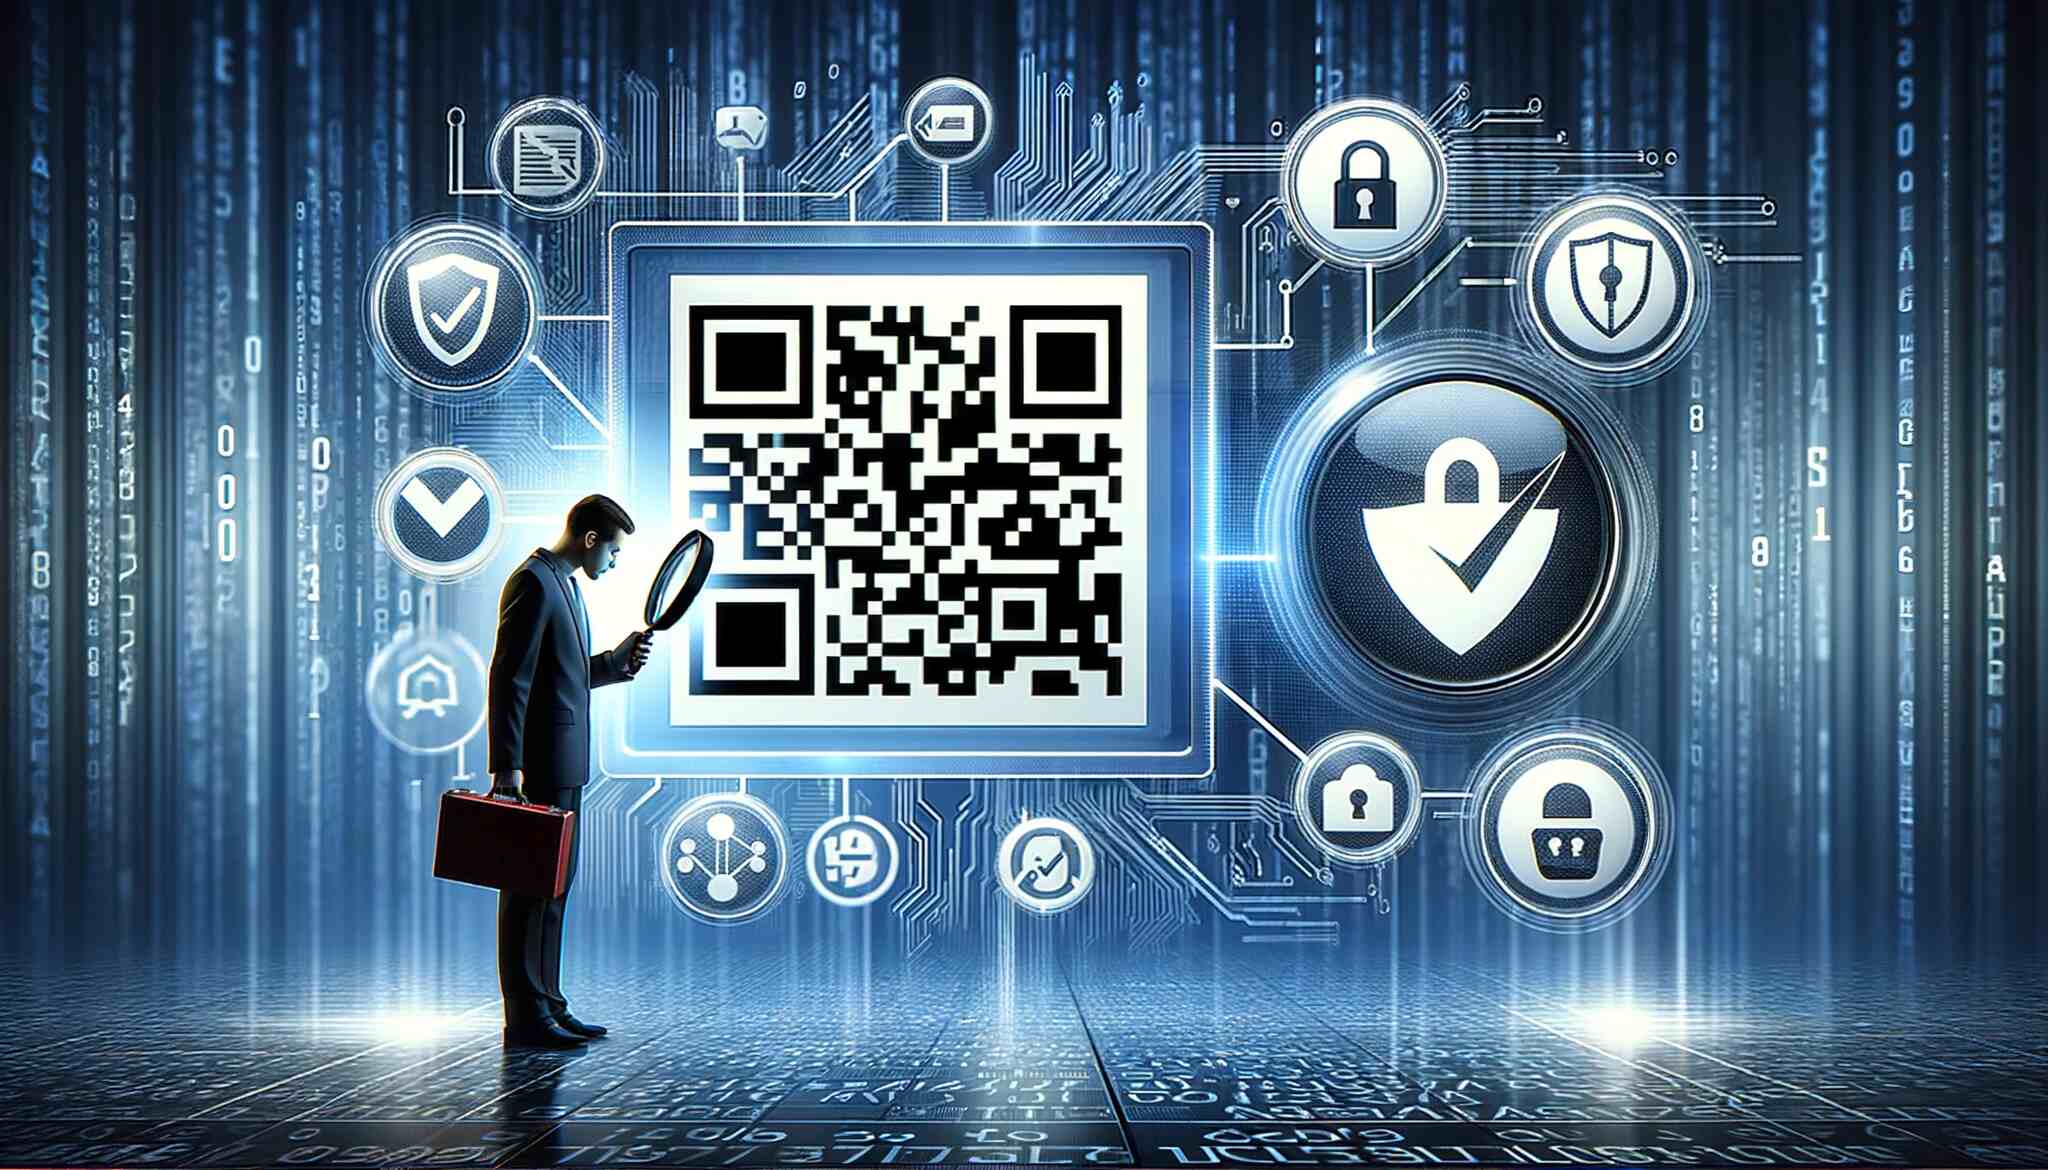 person examining a QR code closely with a magnifying glass, surrounded by digital icons representing security features